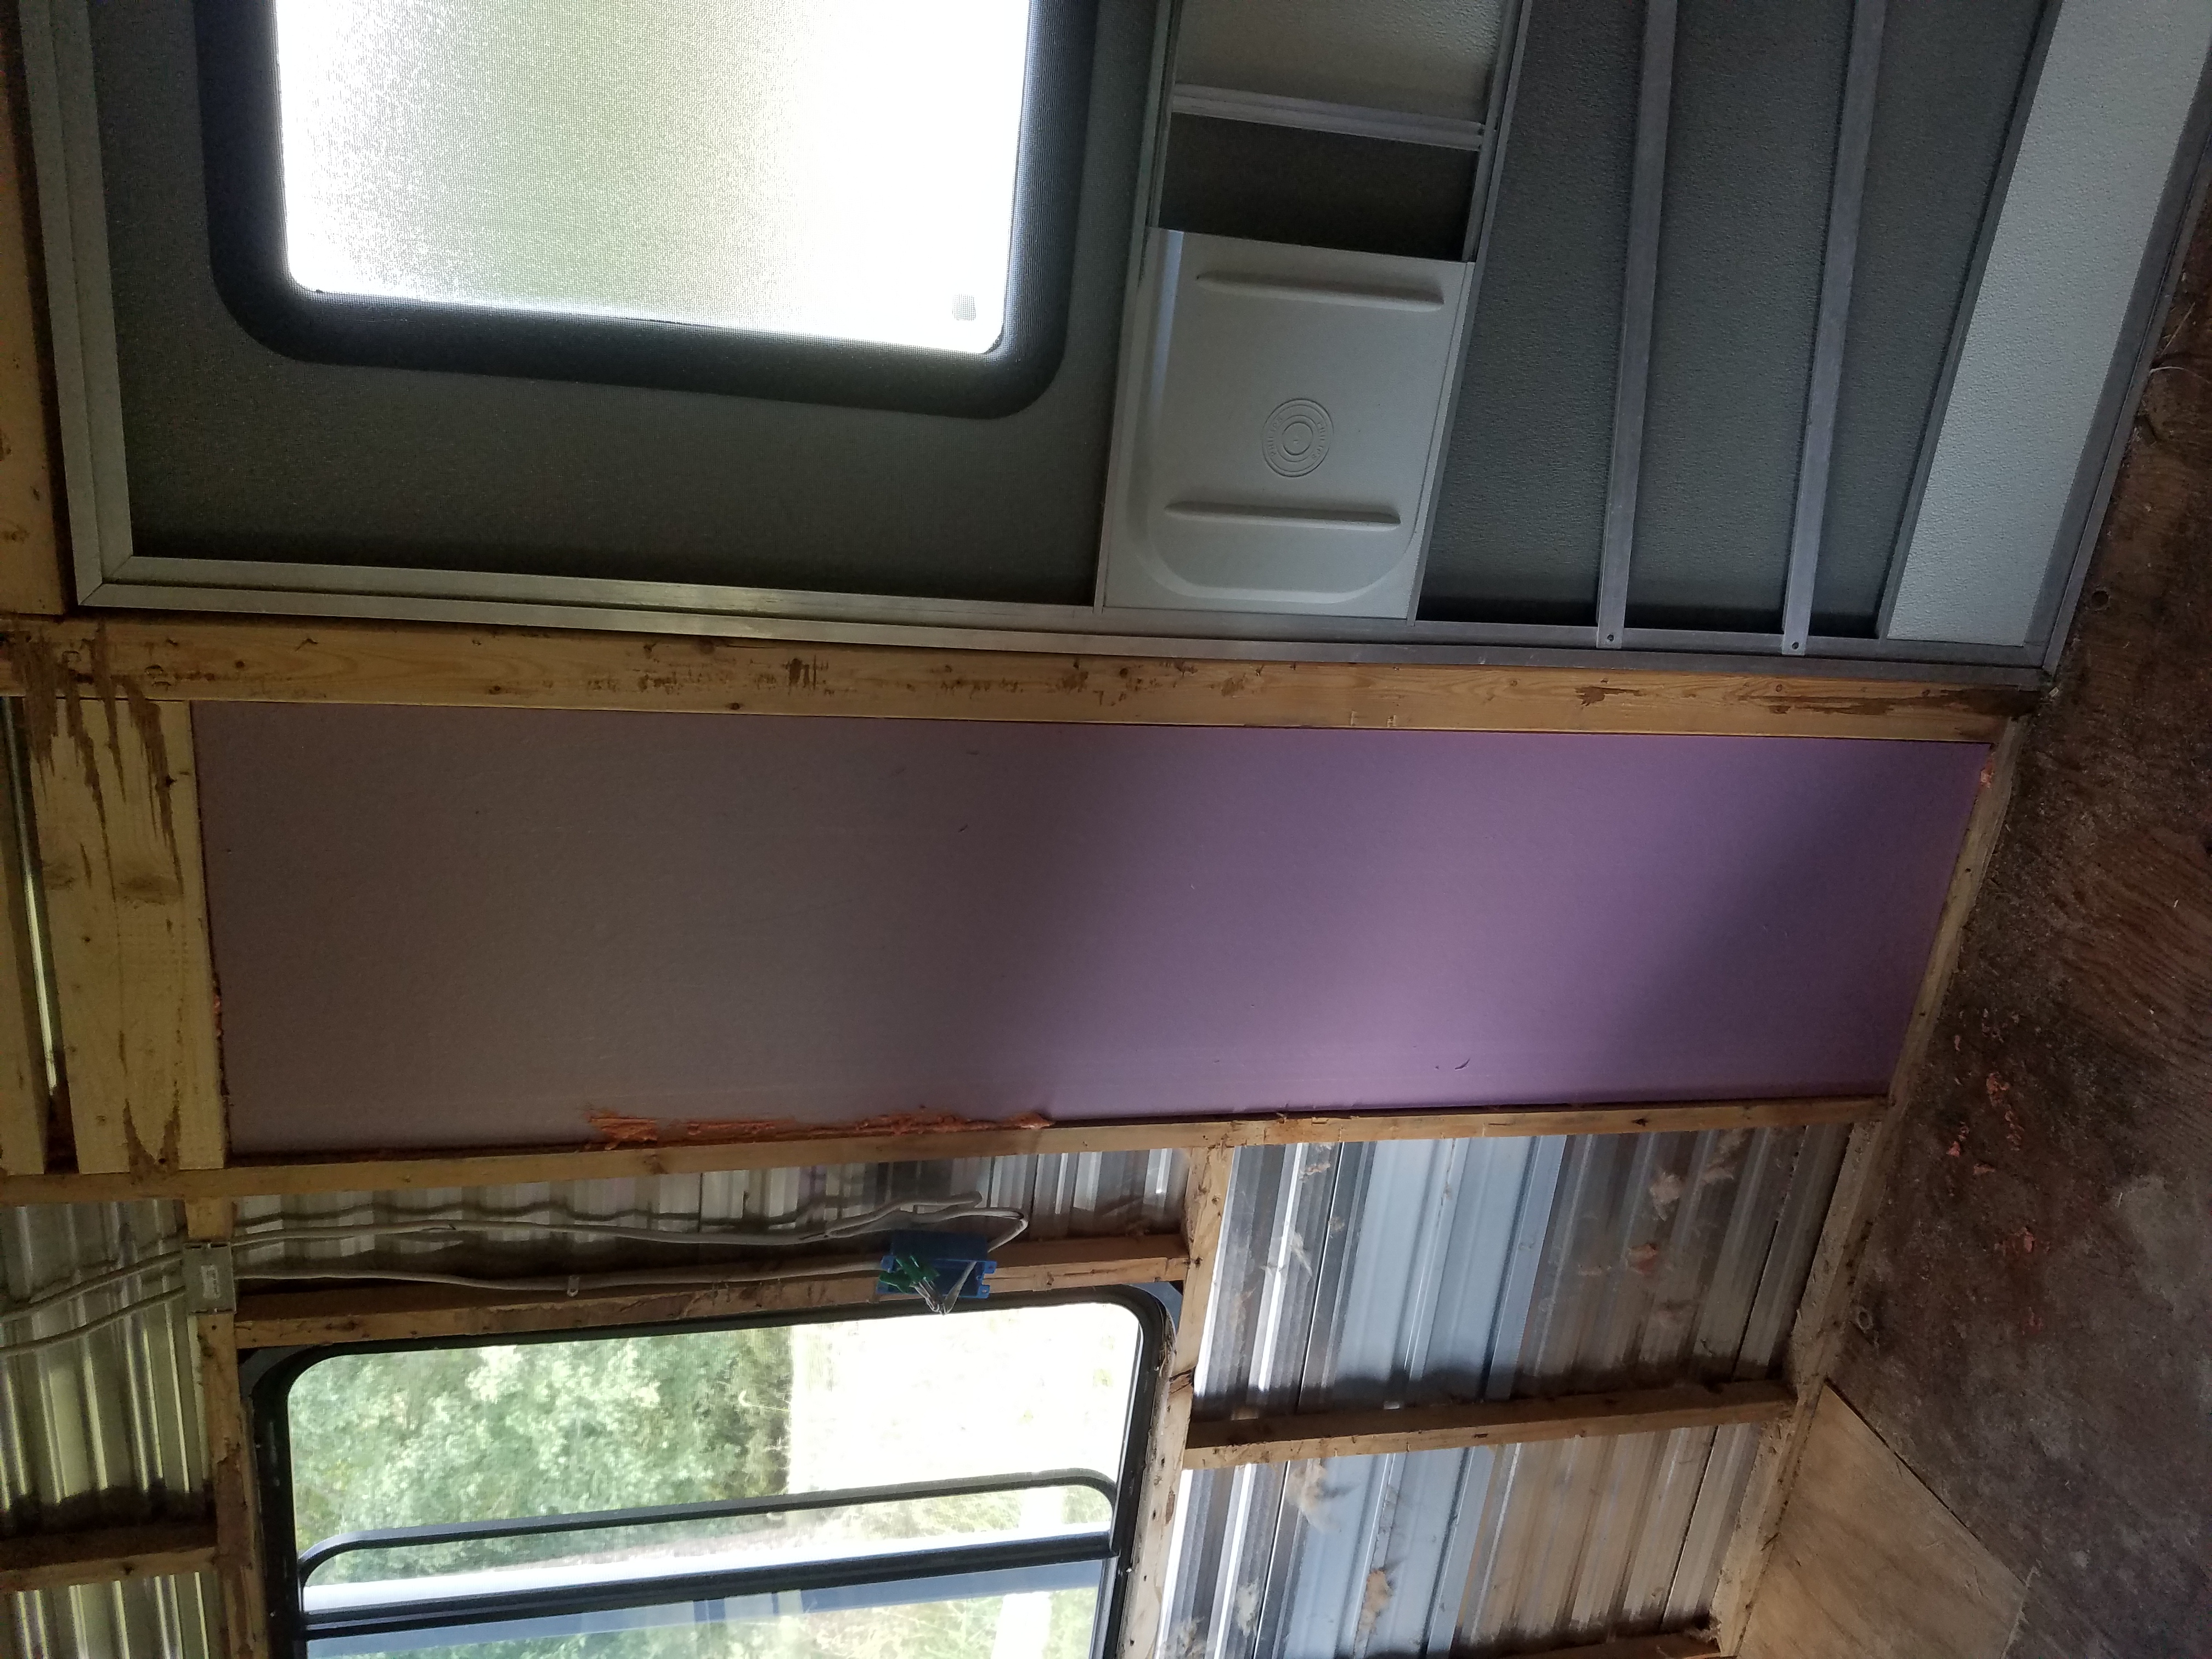 The inside of the travel trailer with the framing exposed and a square of purple foam board insulation in place